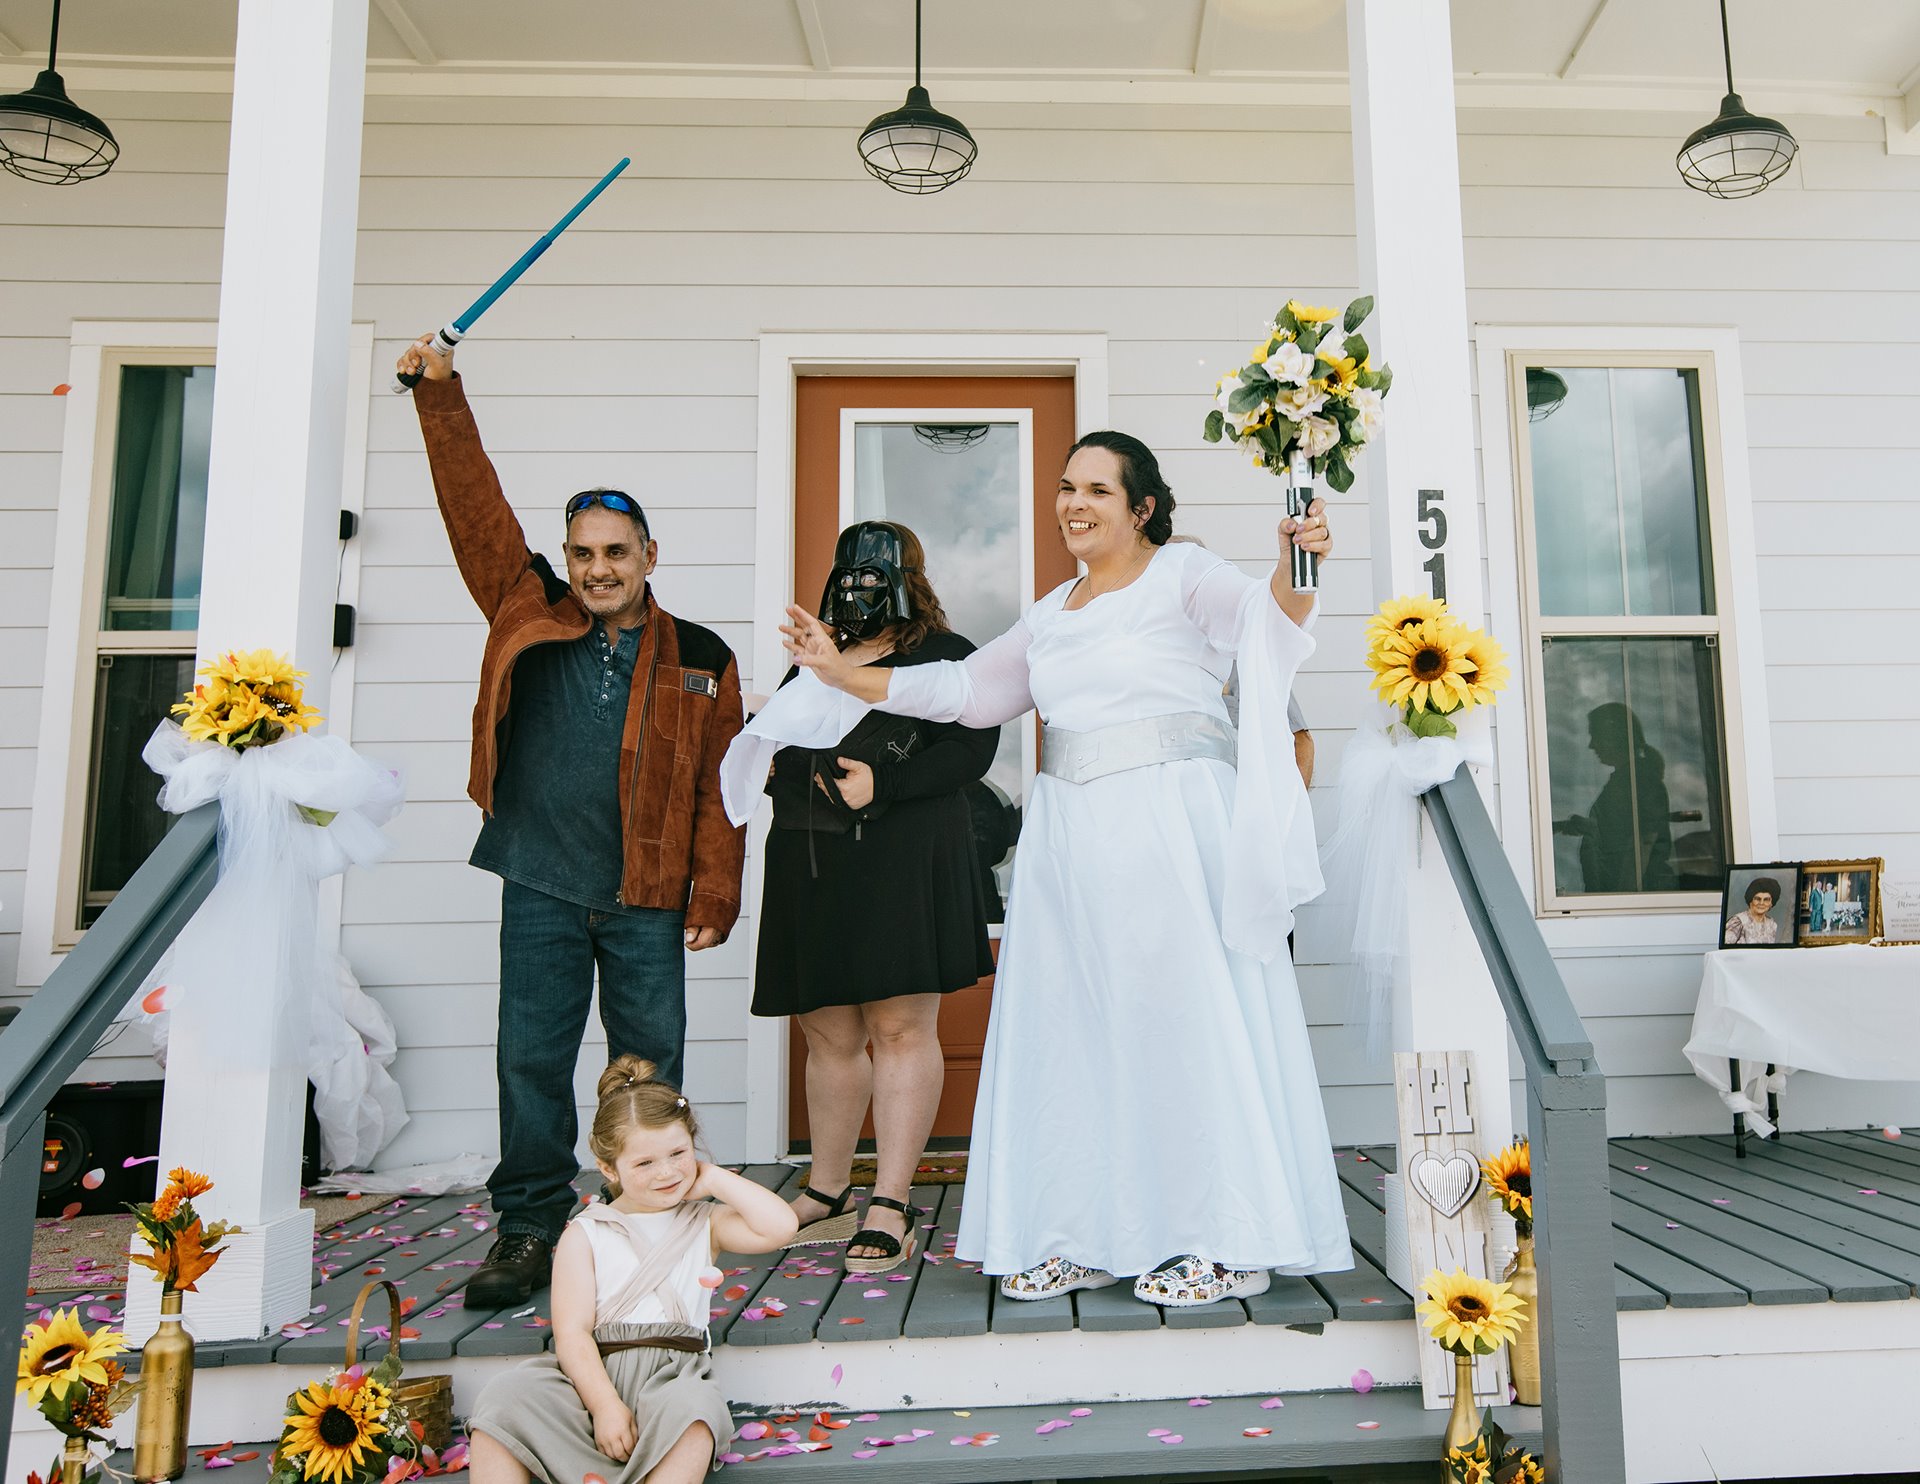 A Star Wars themed wedding of Simon and Kristy Naquin. They moved from Isle de Jean-Charles to Gray six months earlier. Gray, Louisiana, United States.